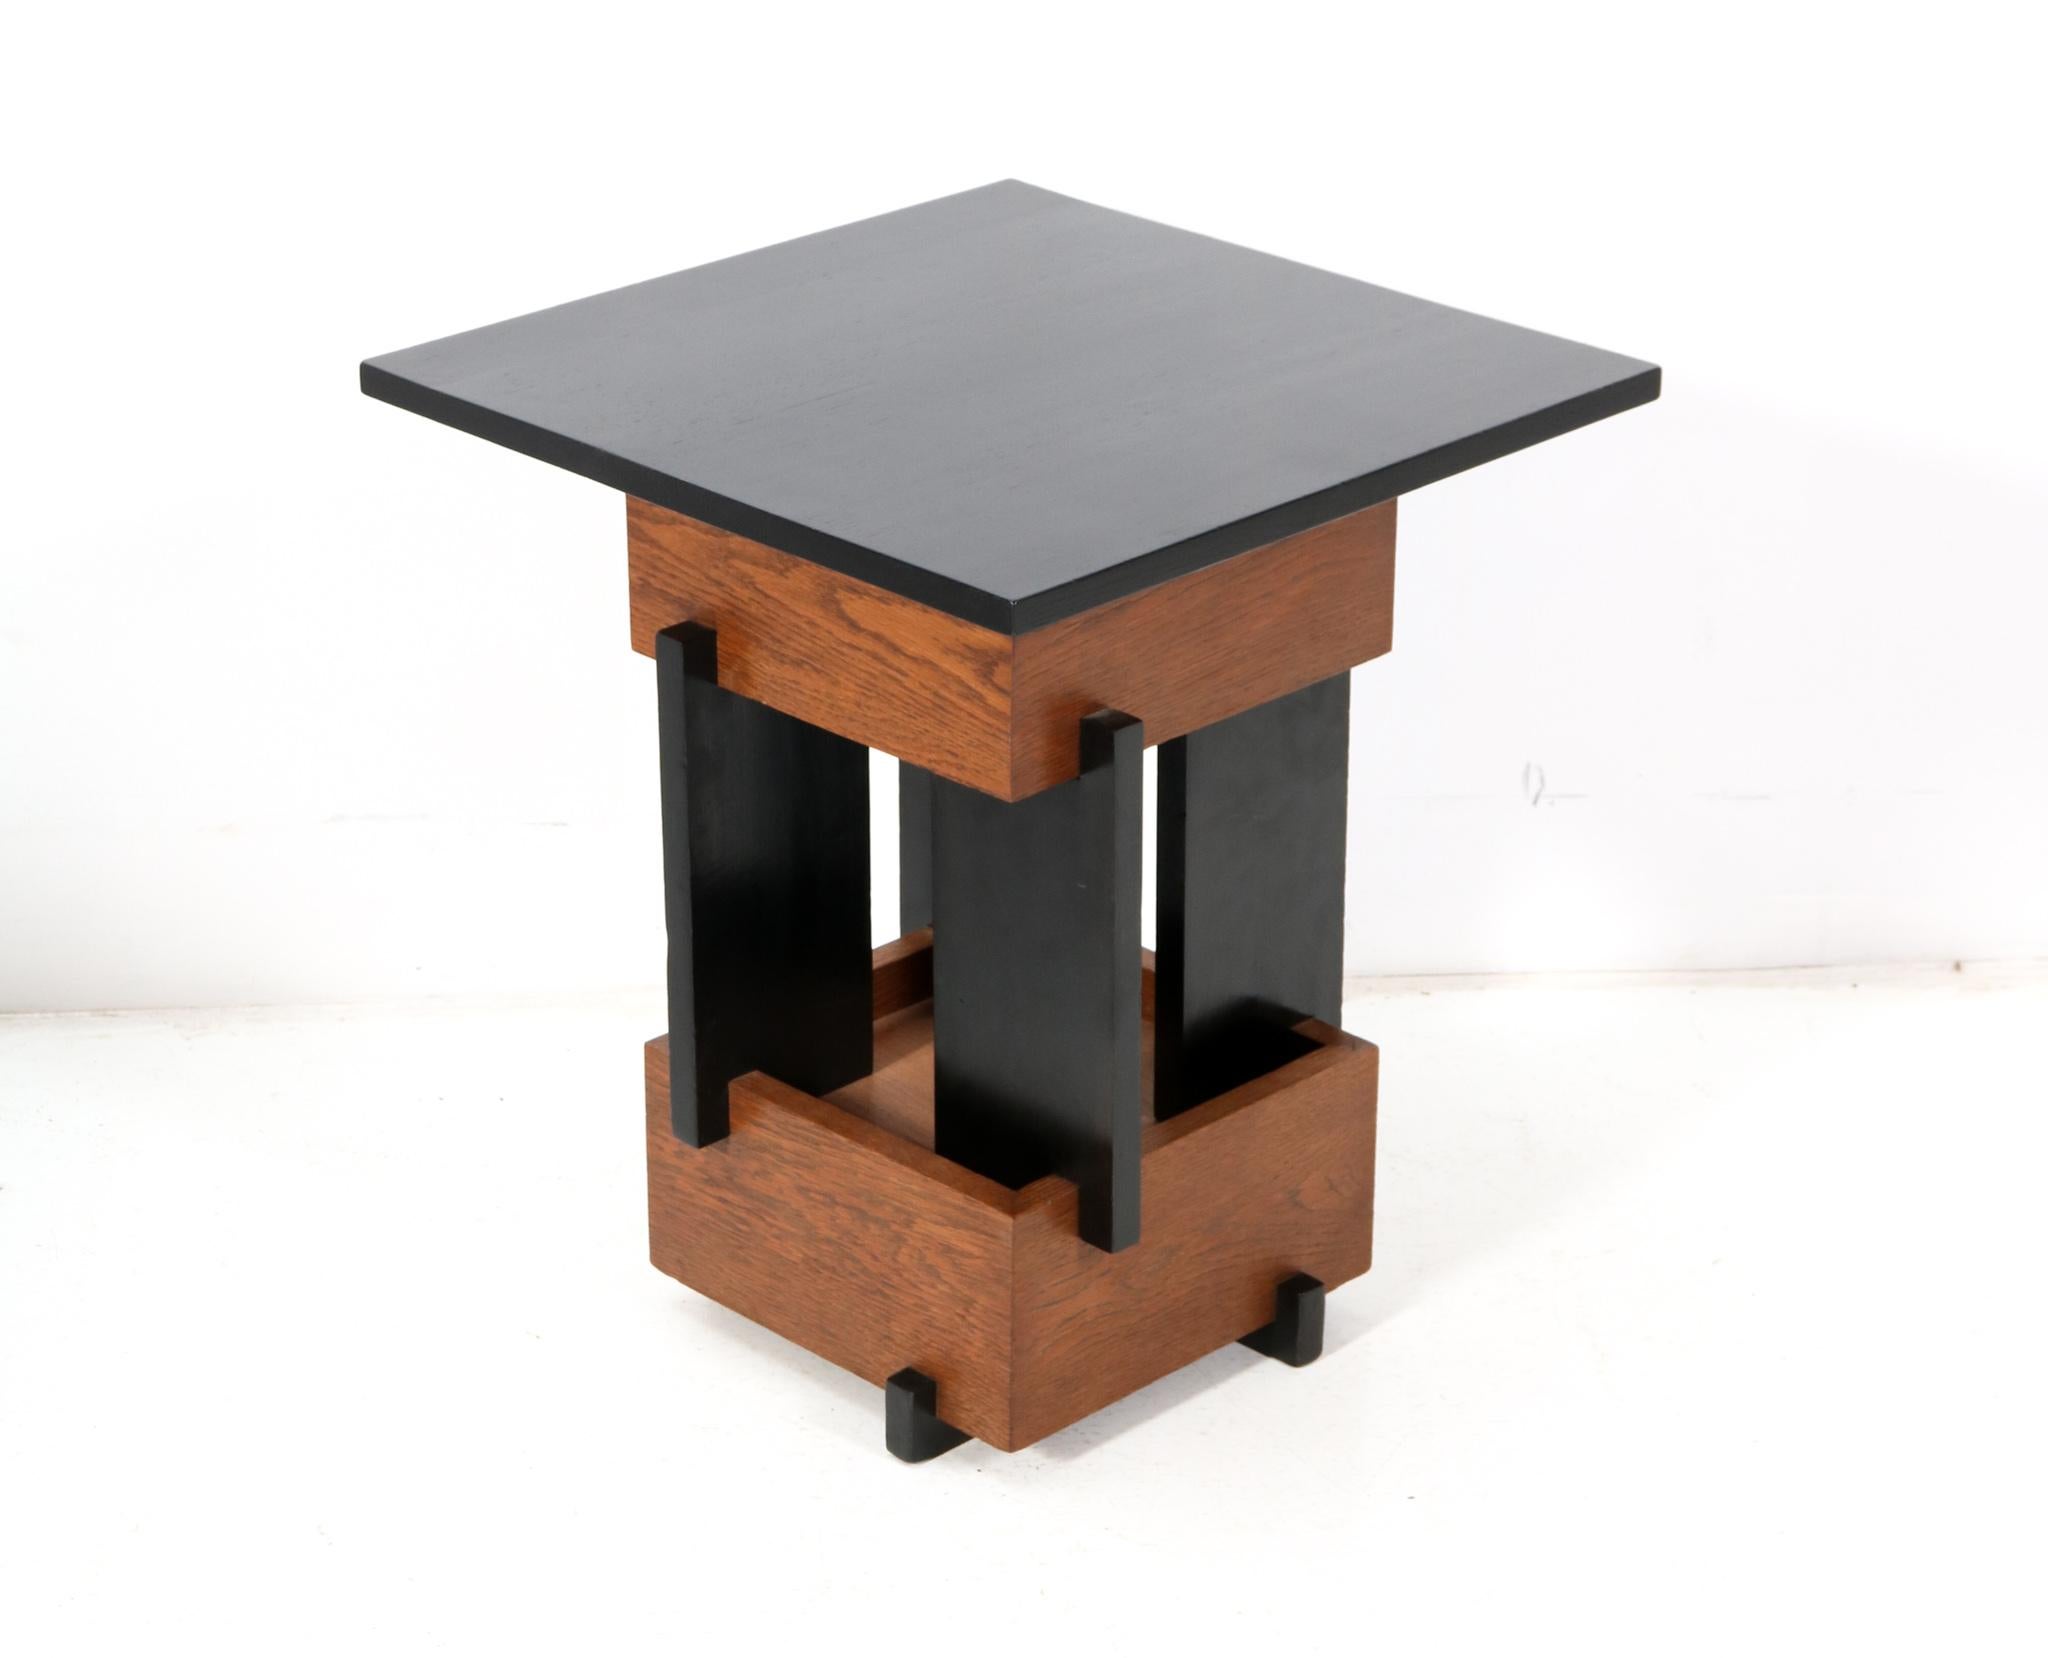 Magnificent and ultra rare Art Deco Modernist side table.
Design by Cor Alons for Fa. Winterkamp & van Putten attributed.
Striking Dutch design from the 1930s
Original solid oak frame with original black lacquered beech elements.
Original black